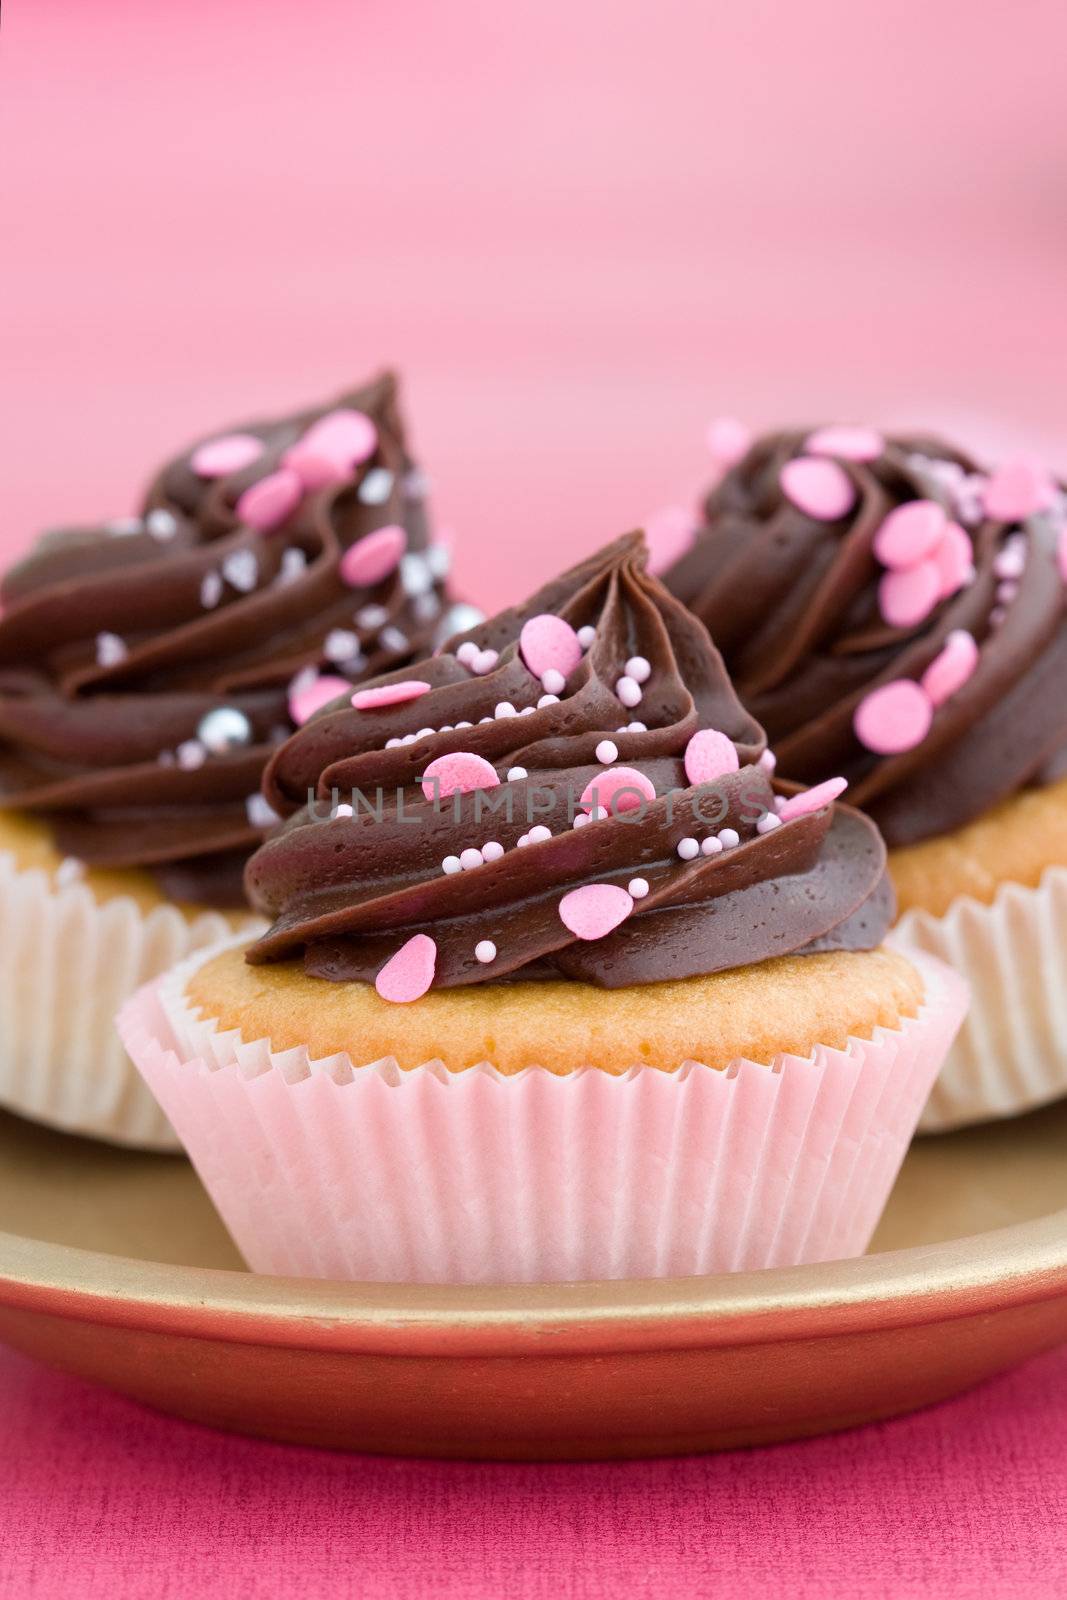 Trio of pink chocolate cupcakes on a plate